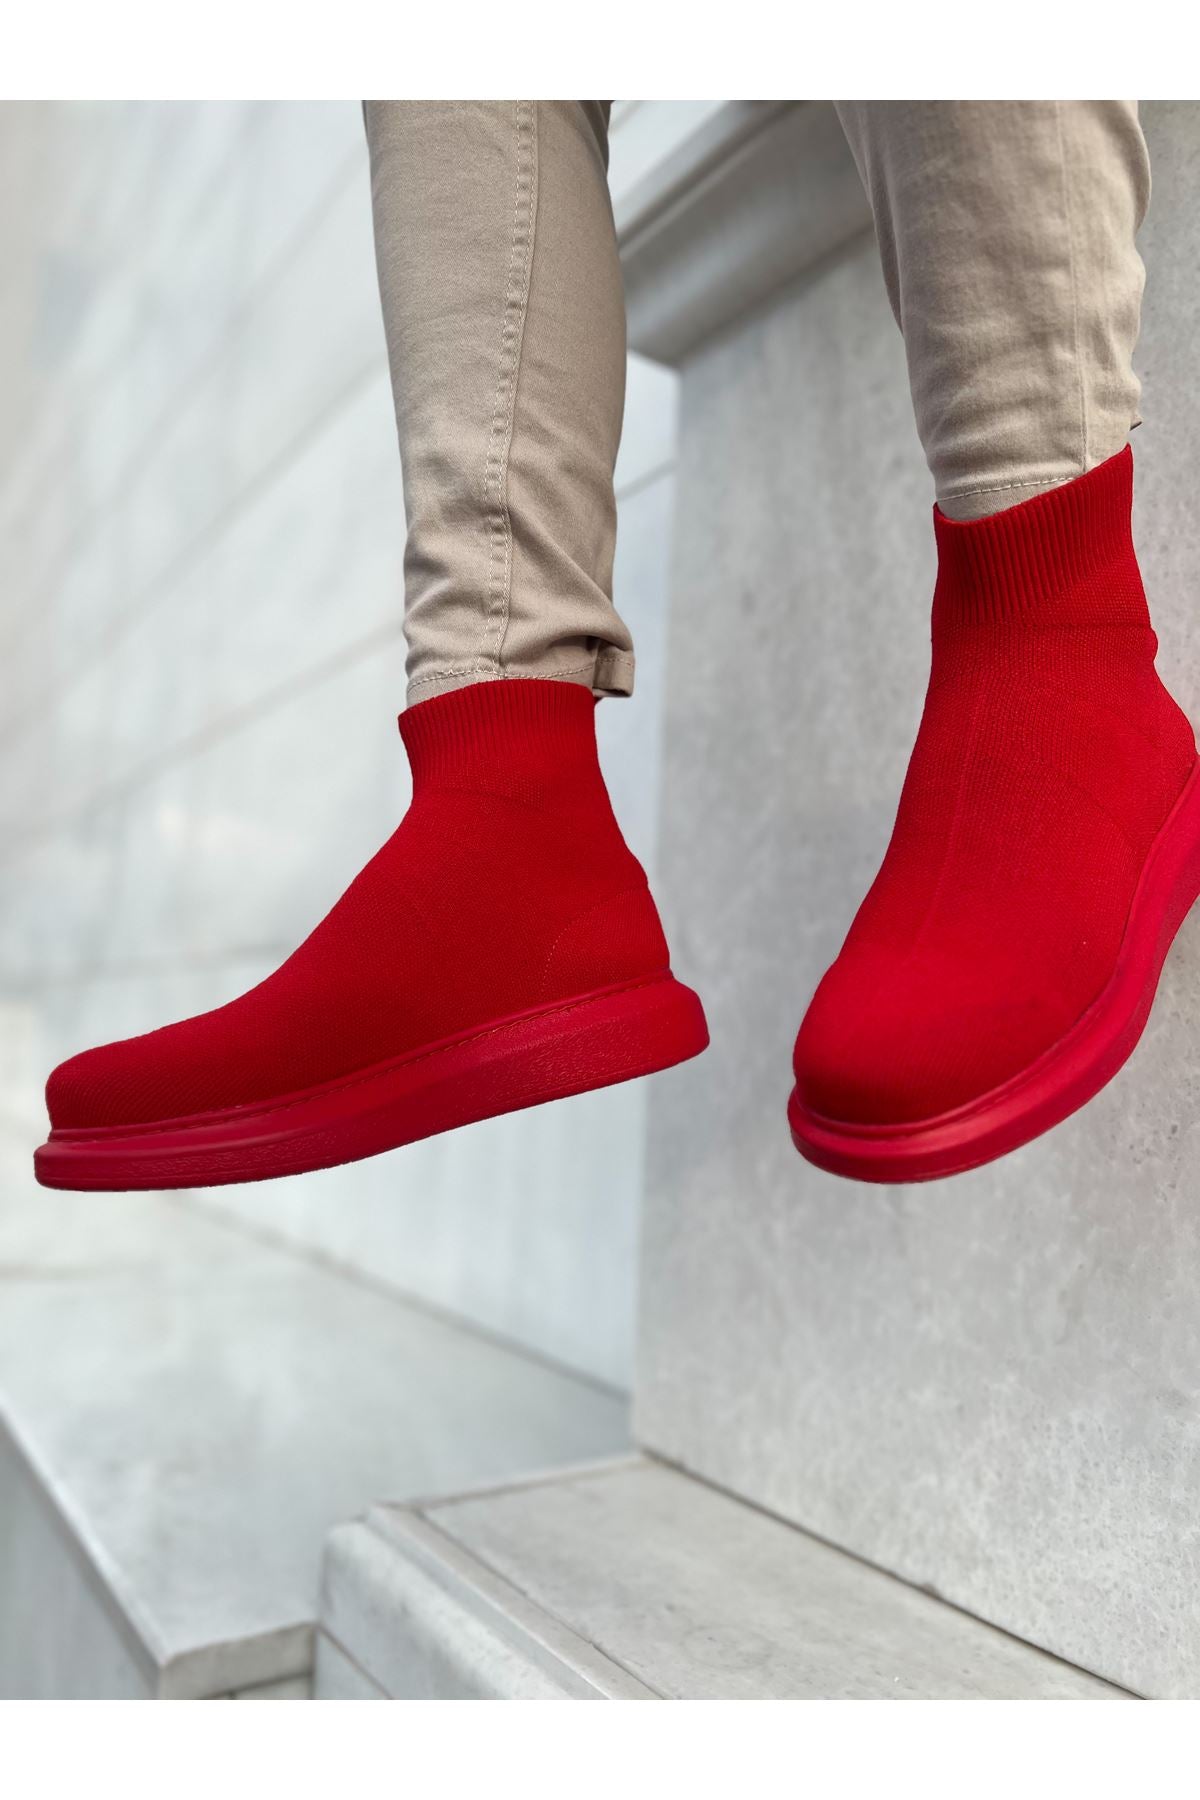 CH207 B.Knitwear RRT Men's Shoes sneakers boot RED - STREETMODE™